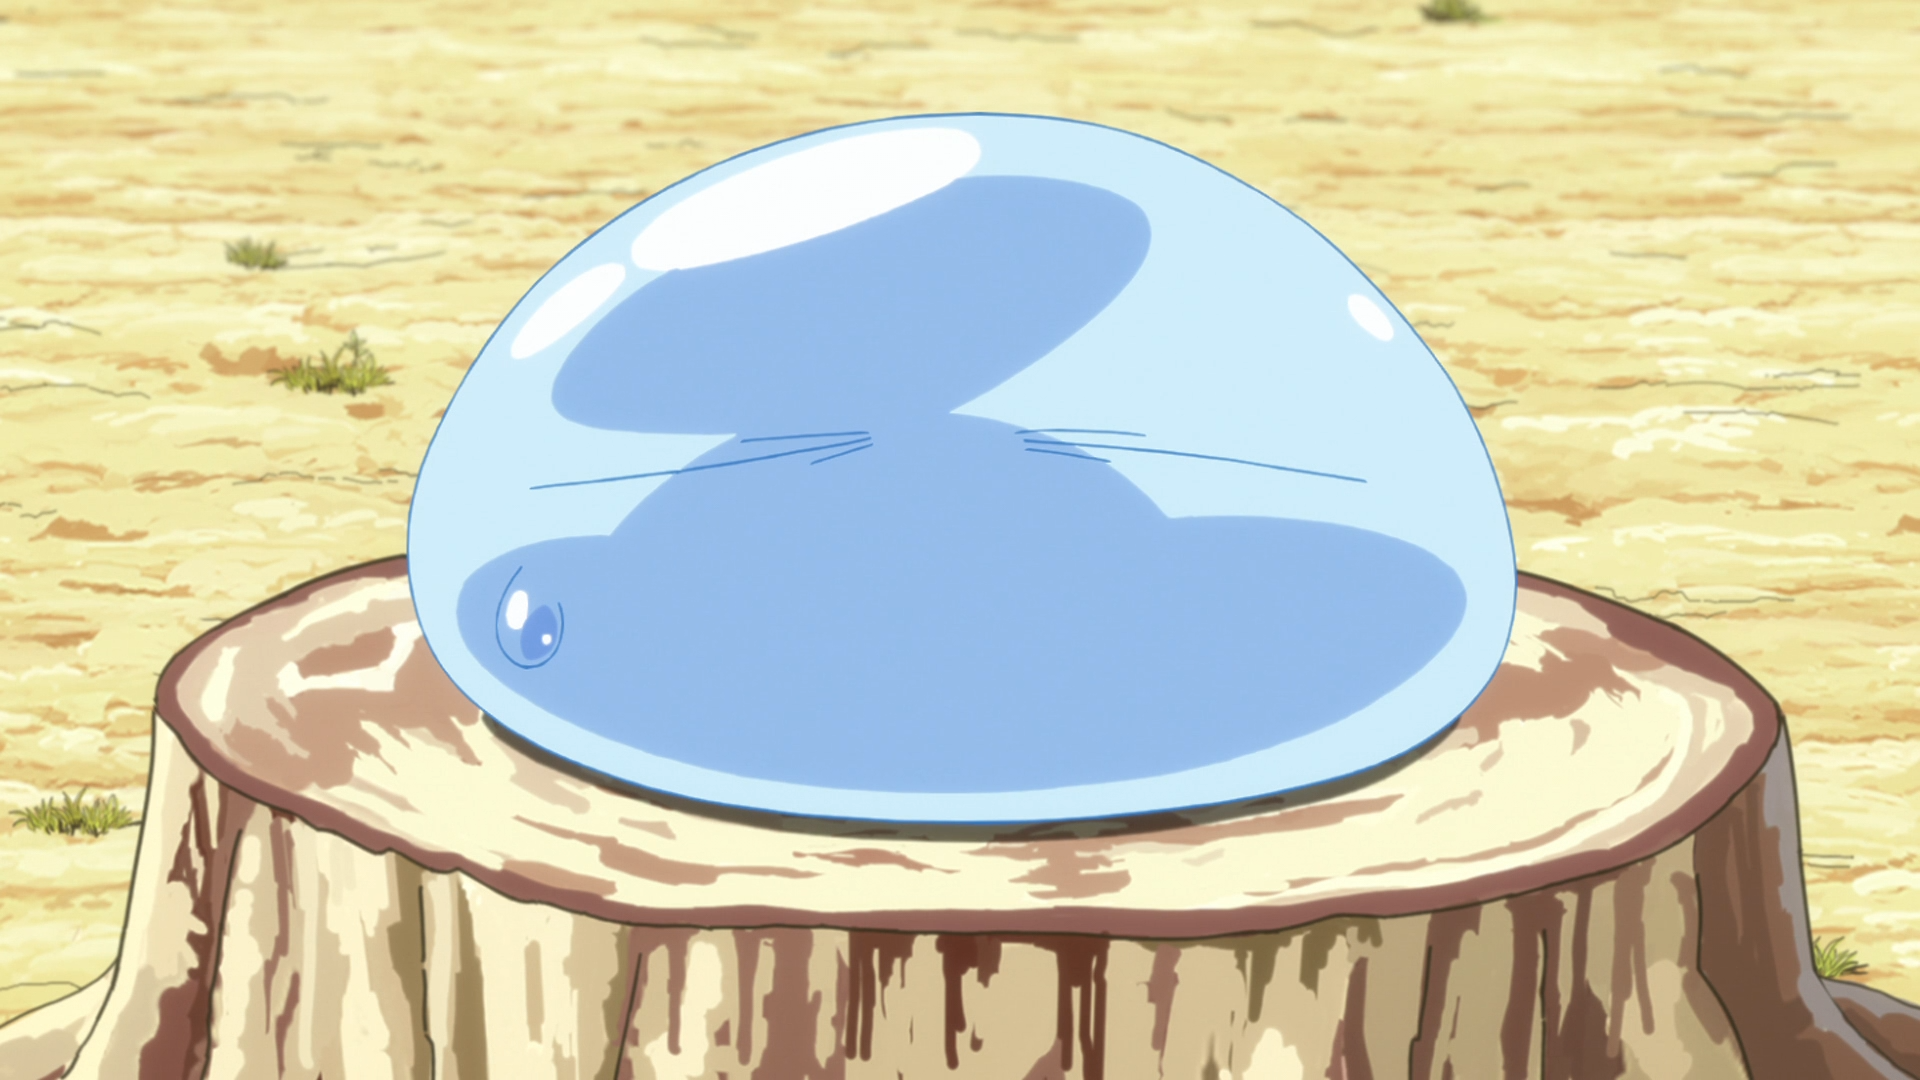 Sitting on a tree stump in slime form, Rimiru prepares to listen to the Goblins' pleas for help in a scene from the That Time I Got Reincarnated as a Slime TV anime.